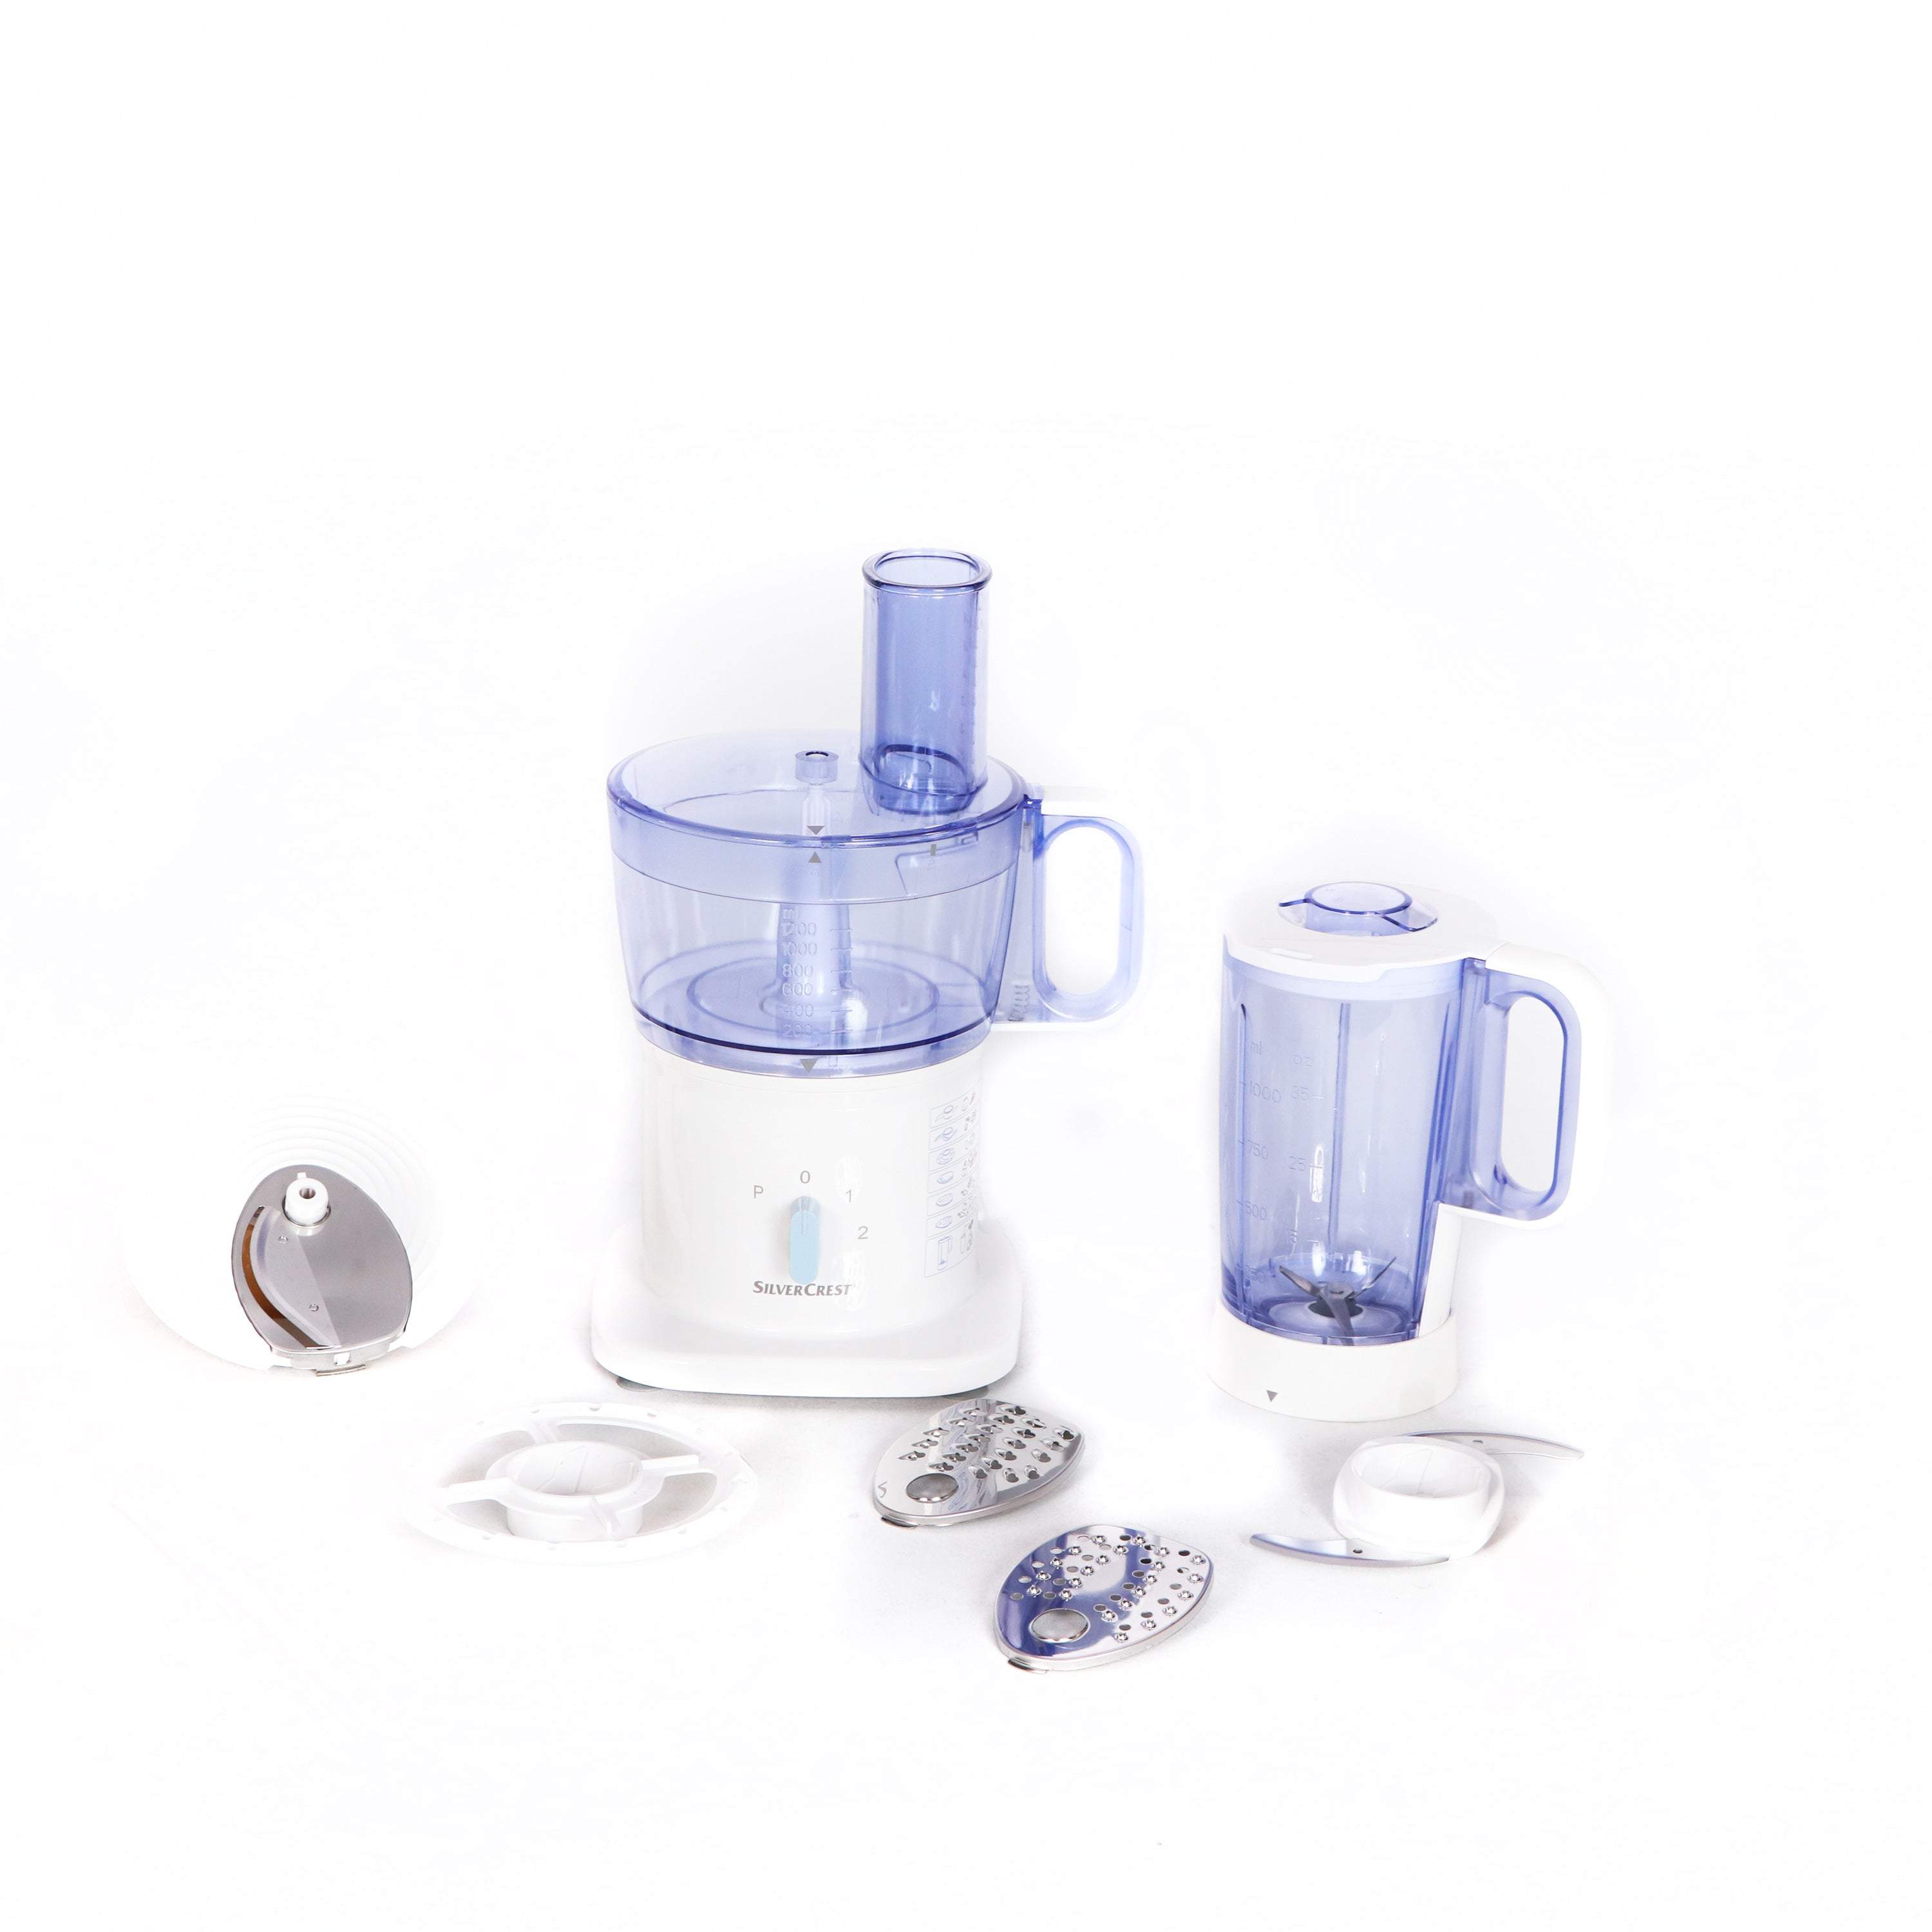 SilverCrest Food Processor, 8 In One, 500W, 8 Functions, Made In Germa –  Royal Brands Co